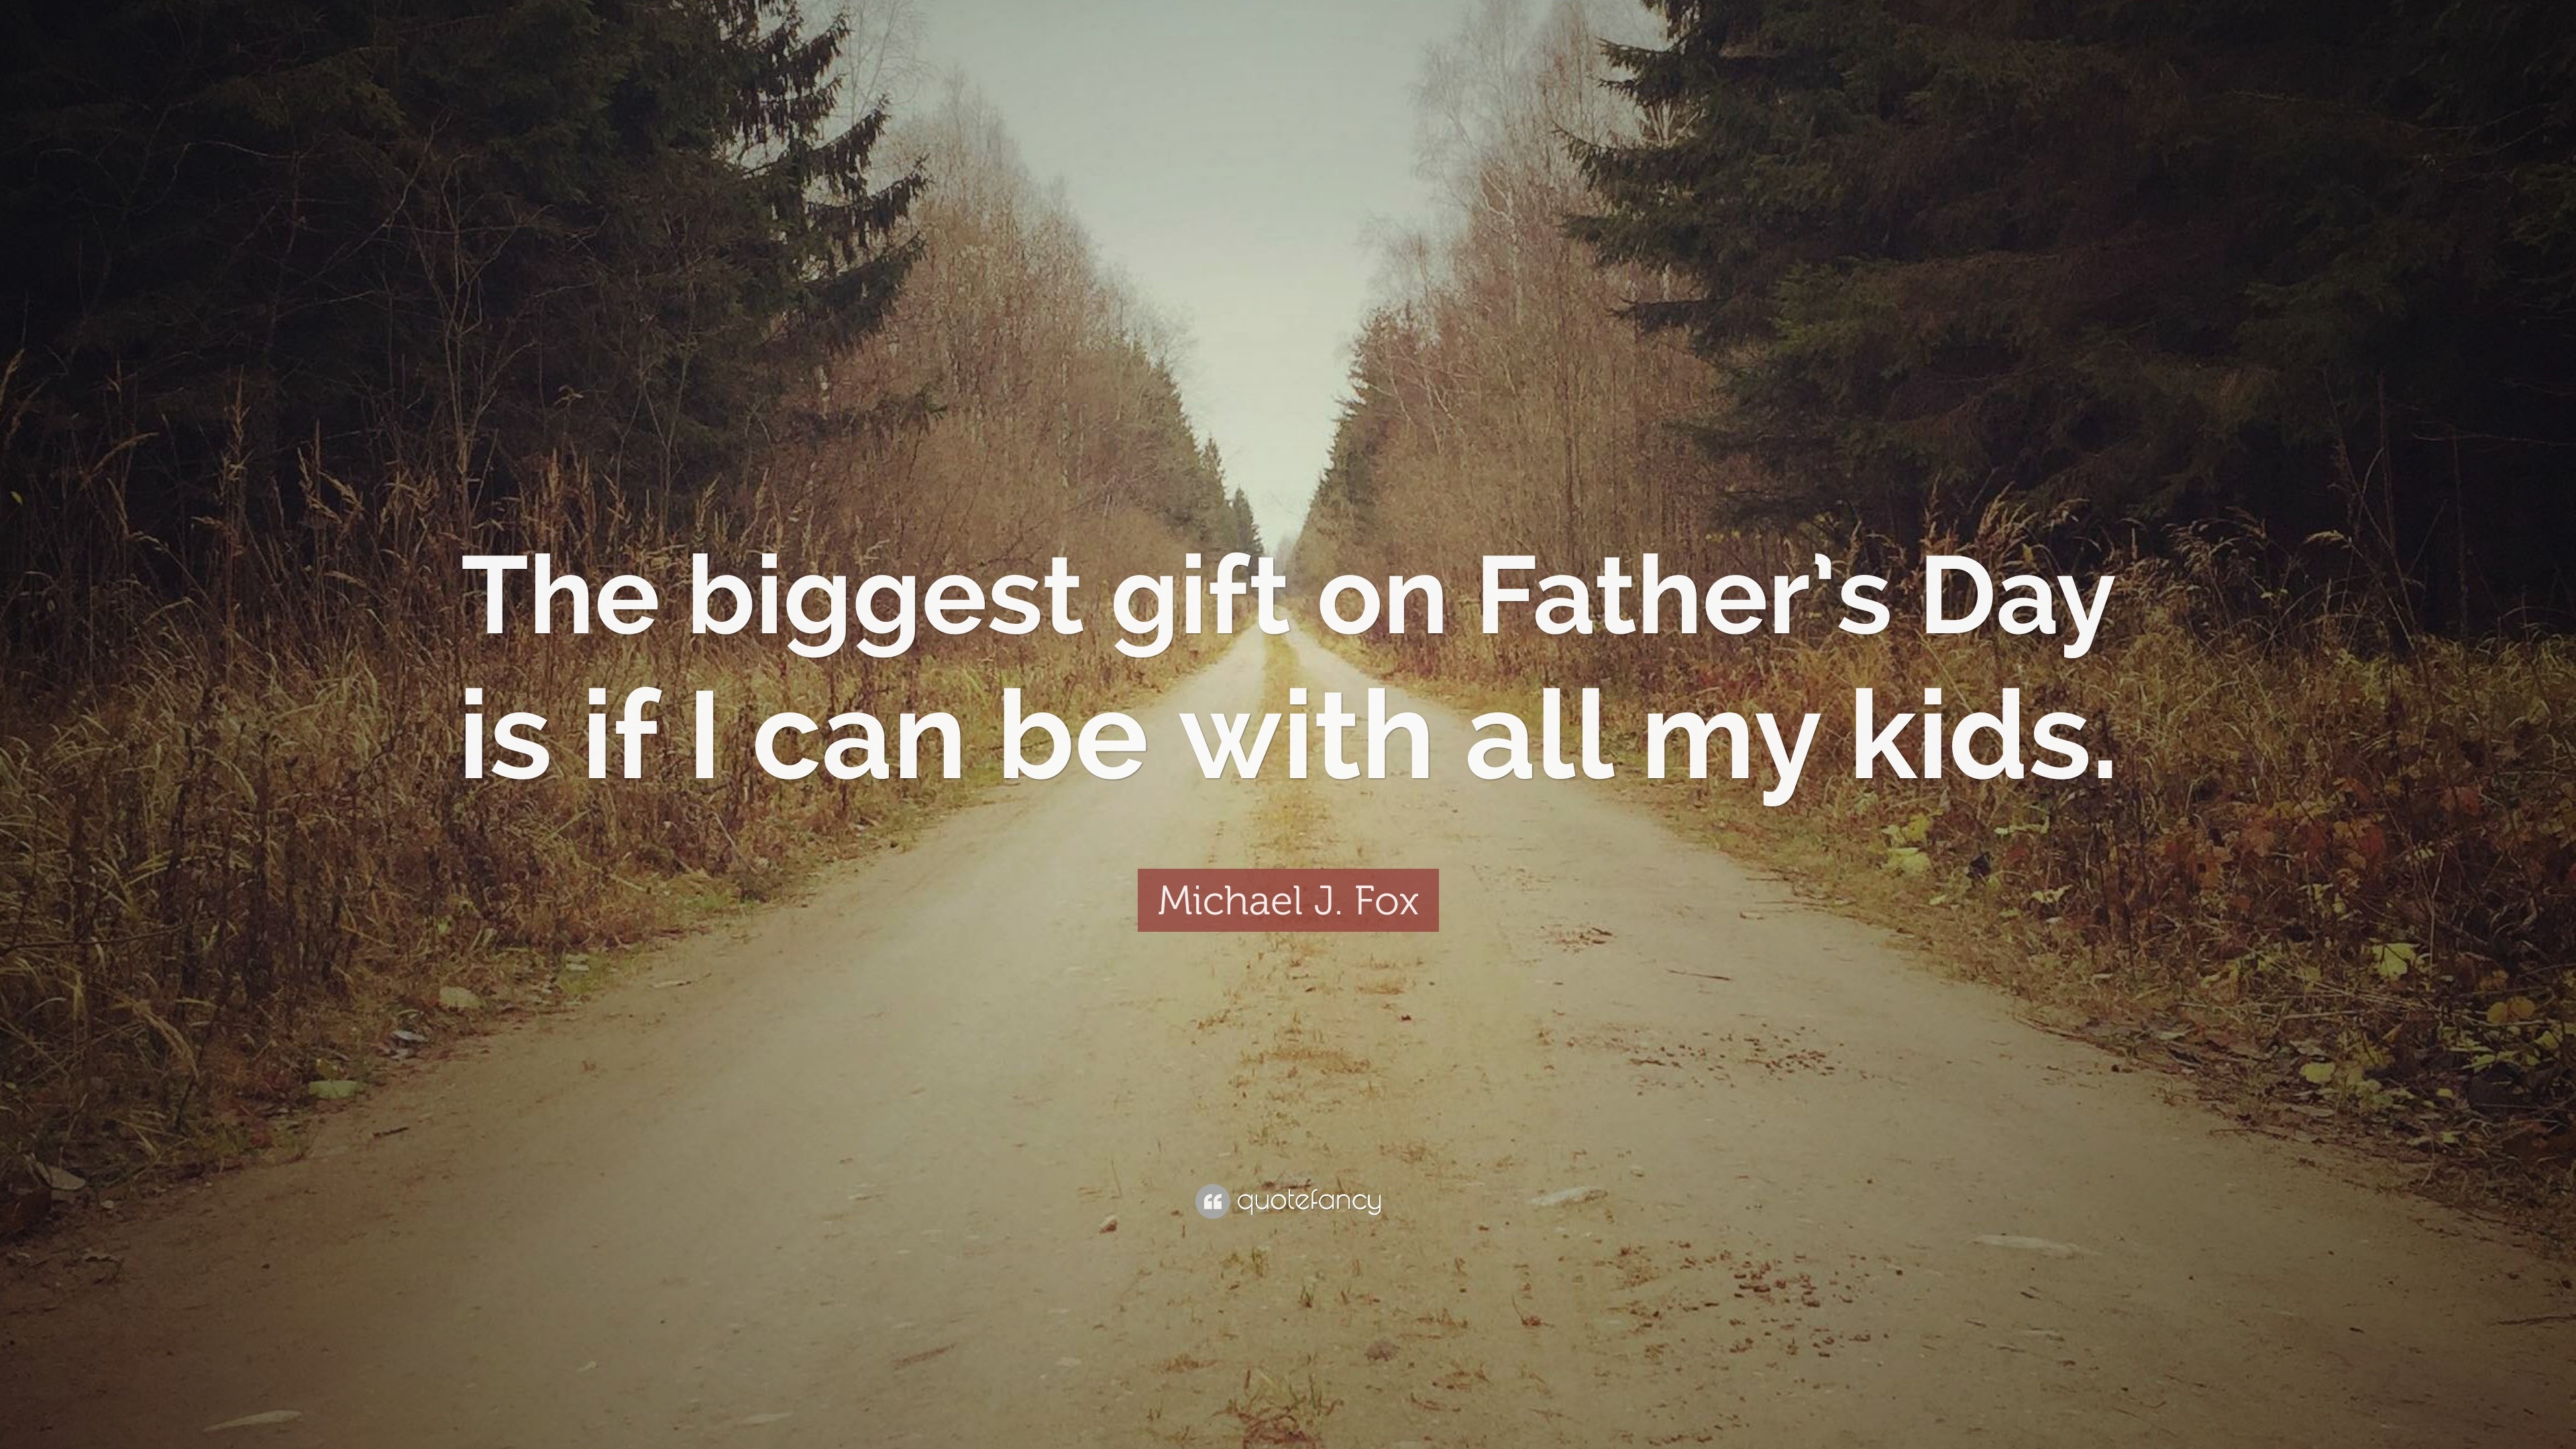 Best Father's Day Quotes: 103 Inspiring Quotes to Make Your Dad Feel Extra  Special - Online Harbour